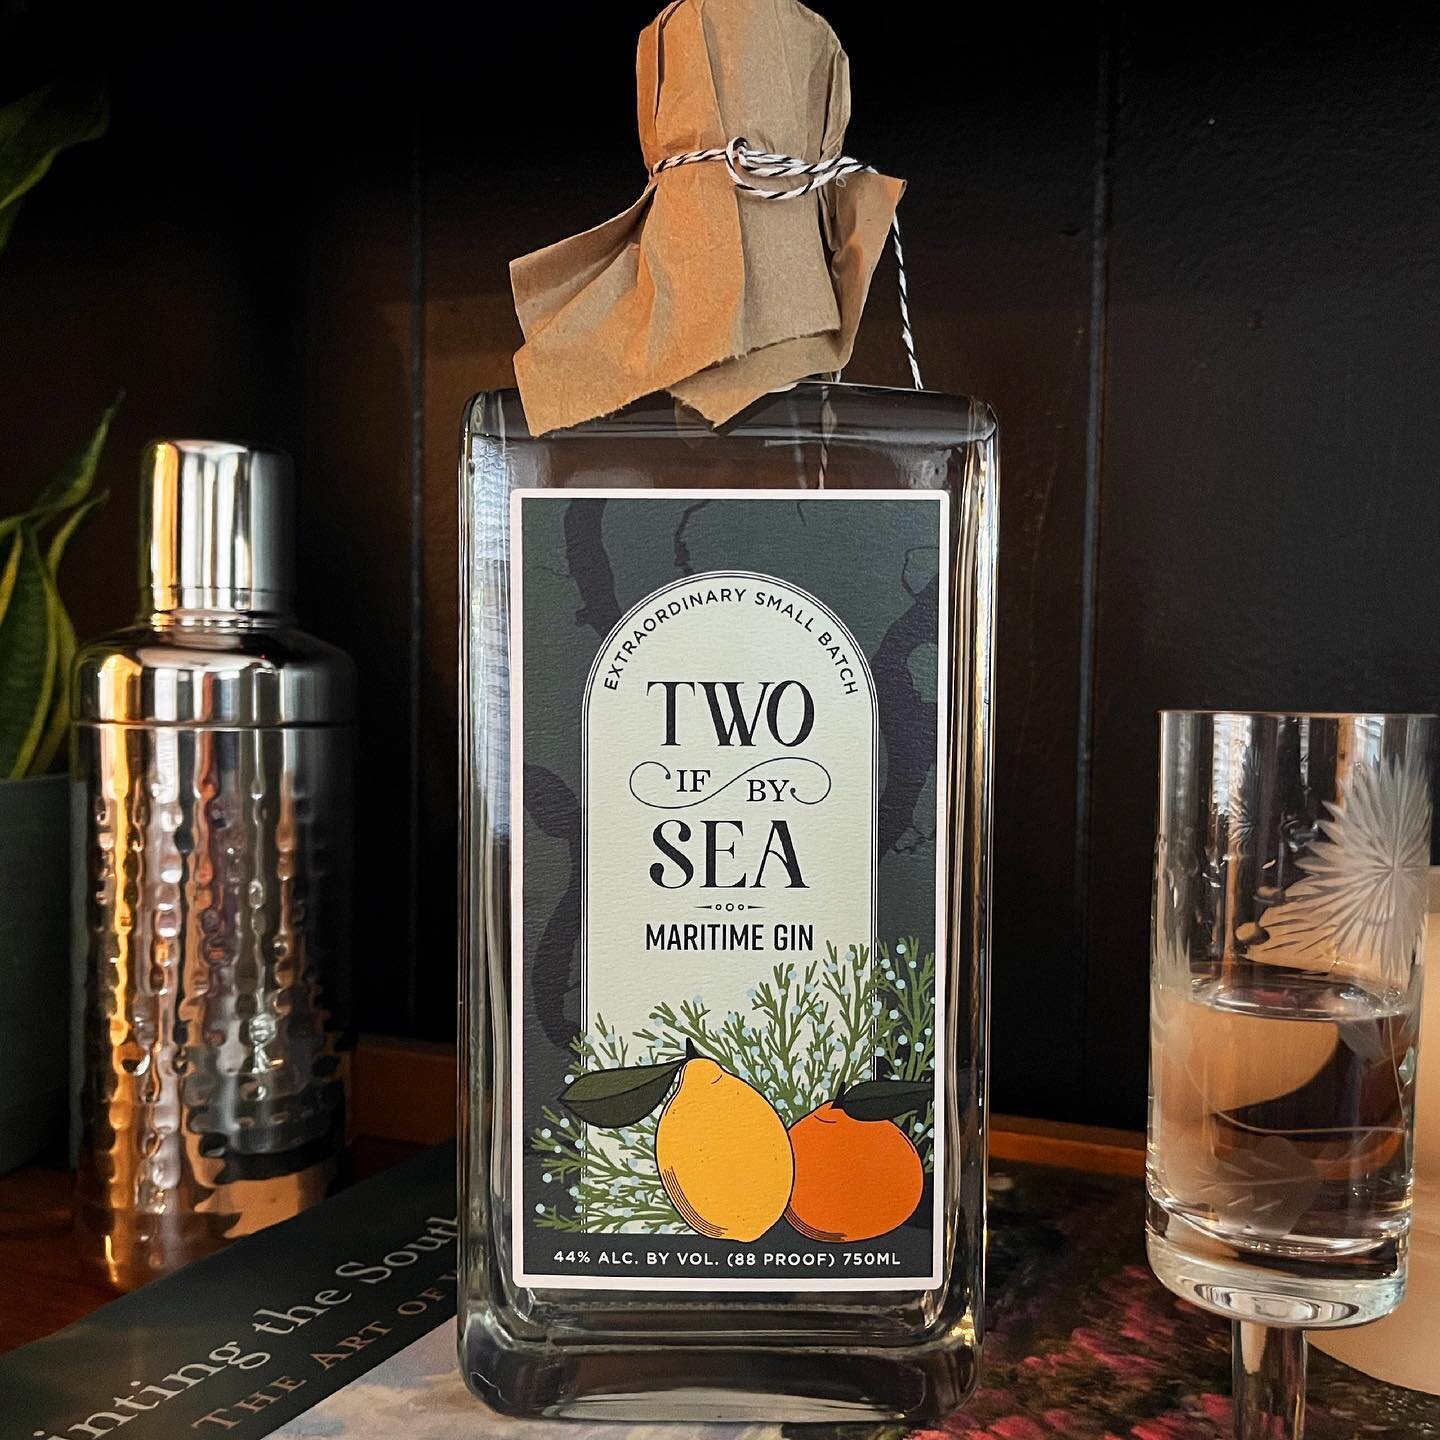 Two if by Sea label design 🍋🍊 @growfoodcarolina and @highwirechs worked together on this small batch, maritime gin made with locally sourced Eastern Red Cedar berries, Meyer lemons, and satsuma mandarins. 

The design includes a map of rivers in th